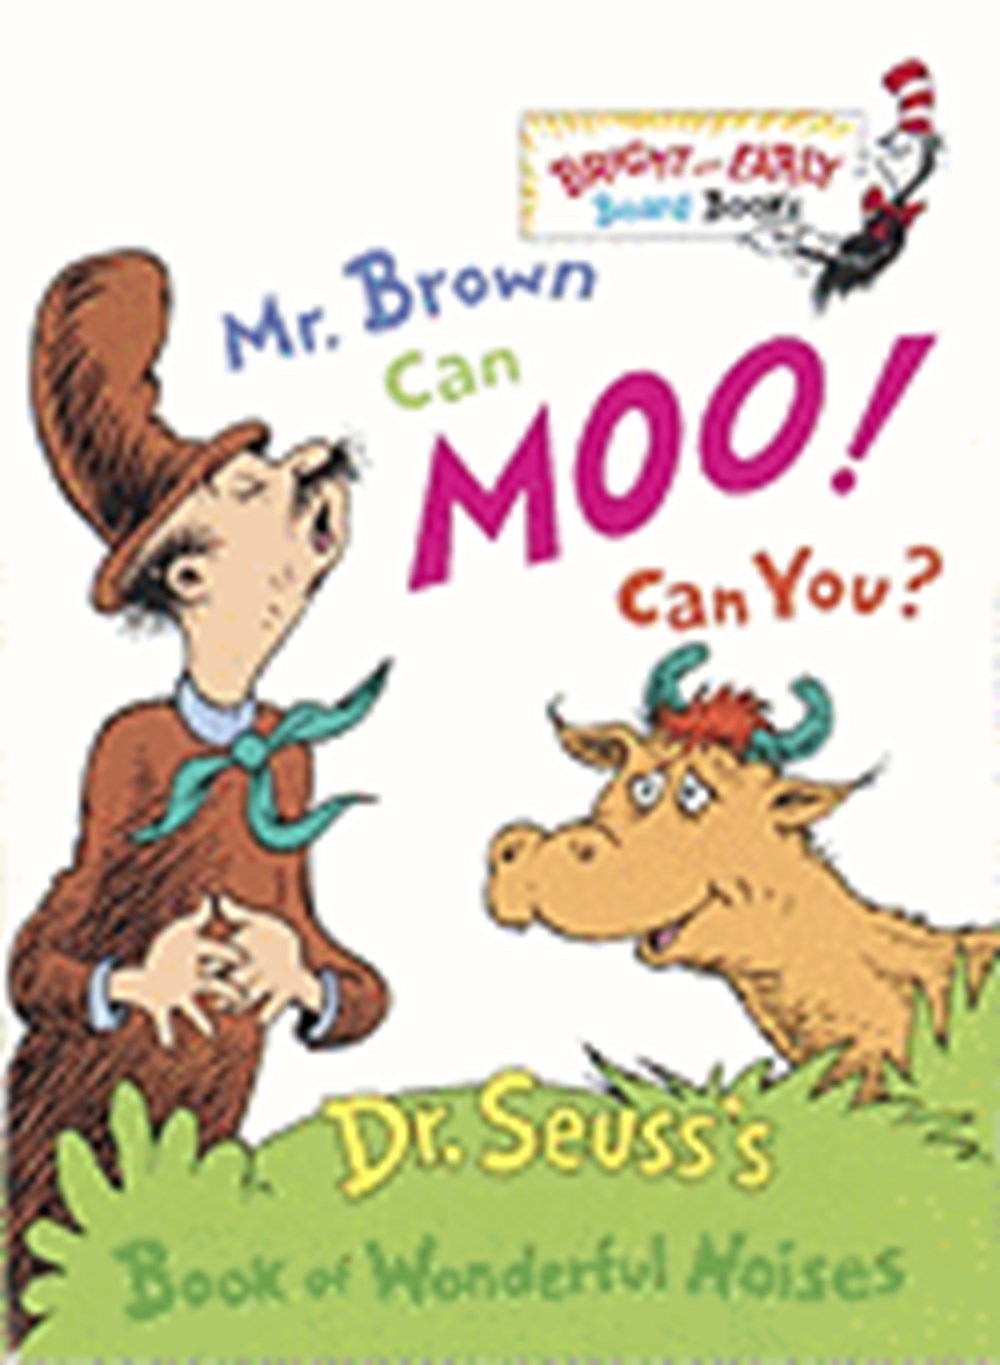 Mr. Brown Can Moo! Can You?: Dr. Seuss's Book of Wonderful Noises